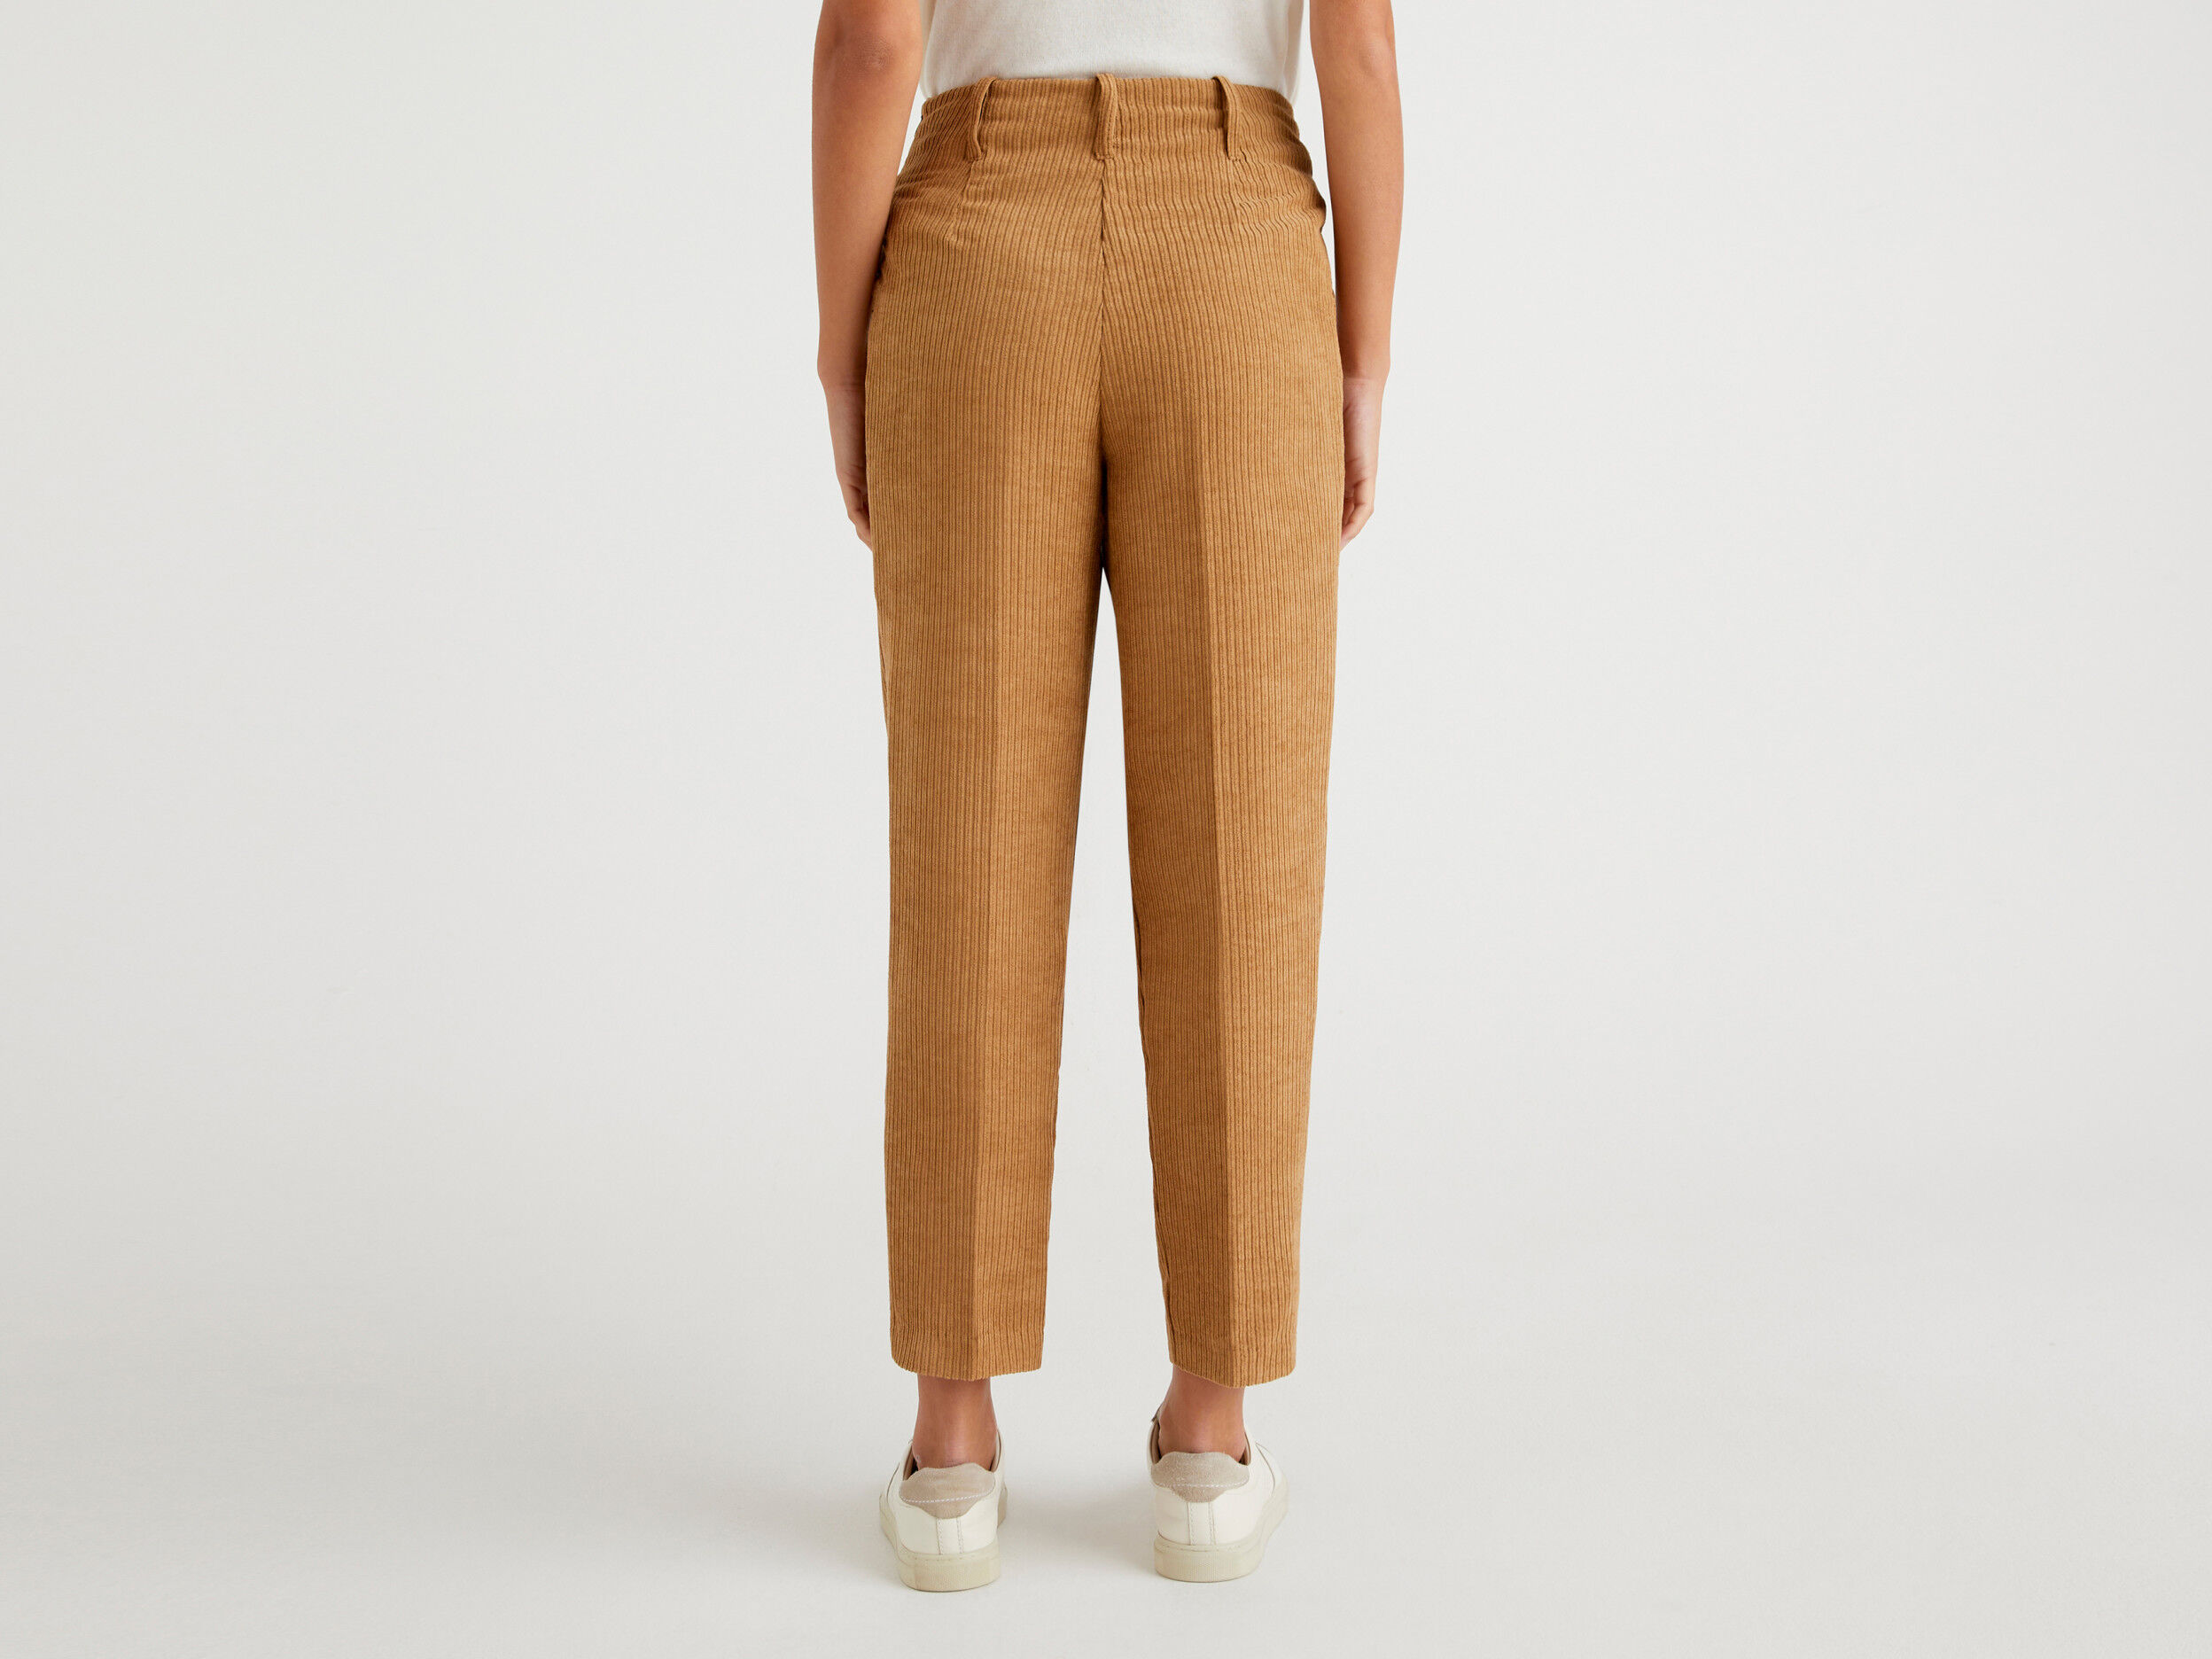 BOSS - Tapered-fit trousers in stretch-cotton corduroy